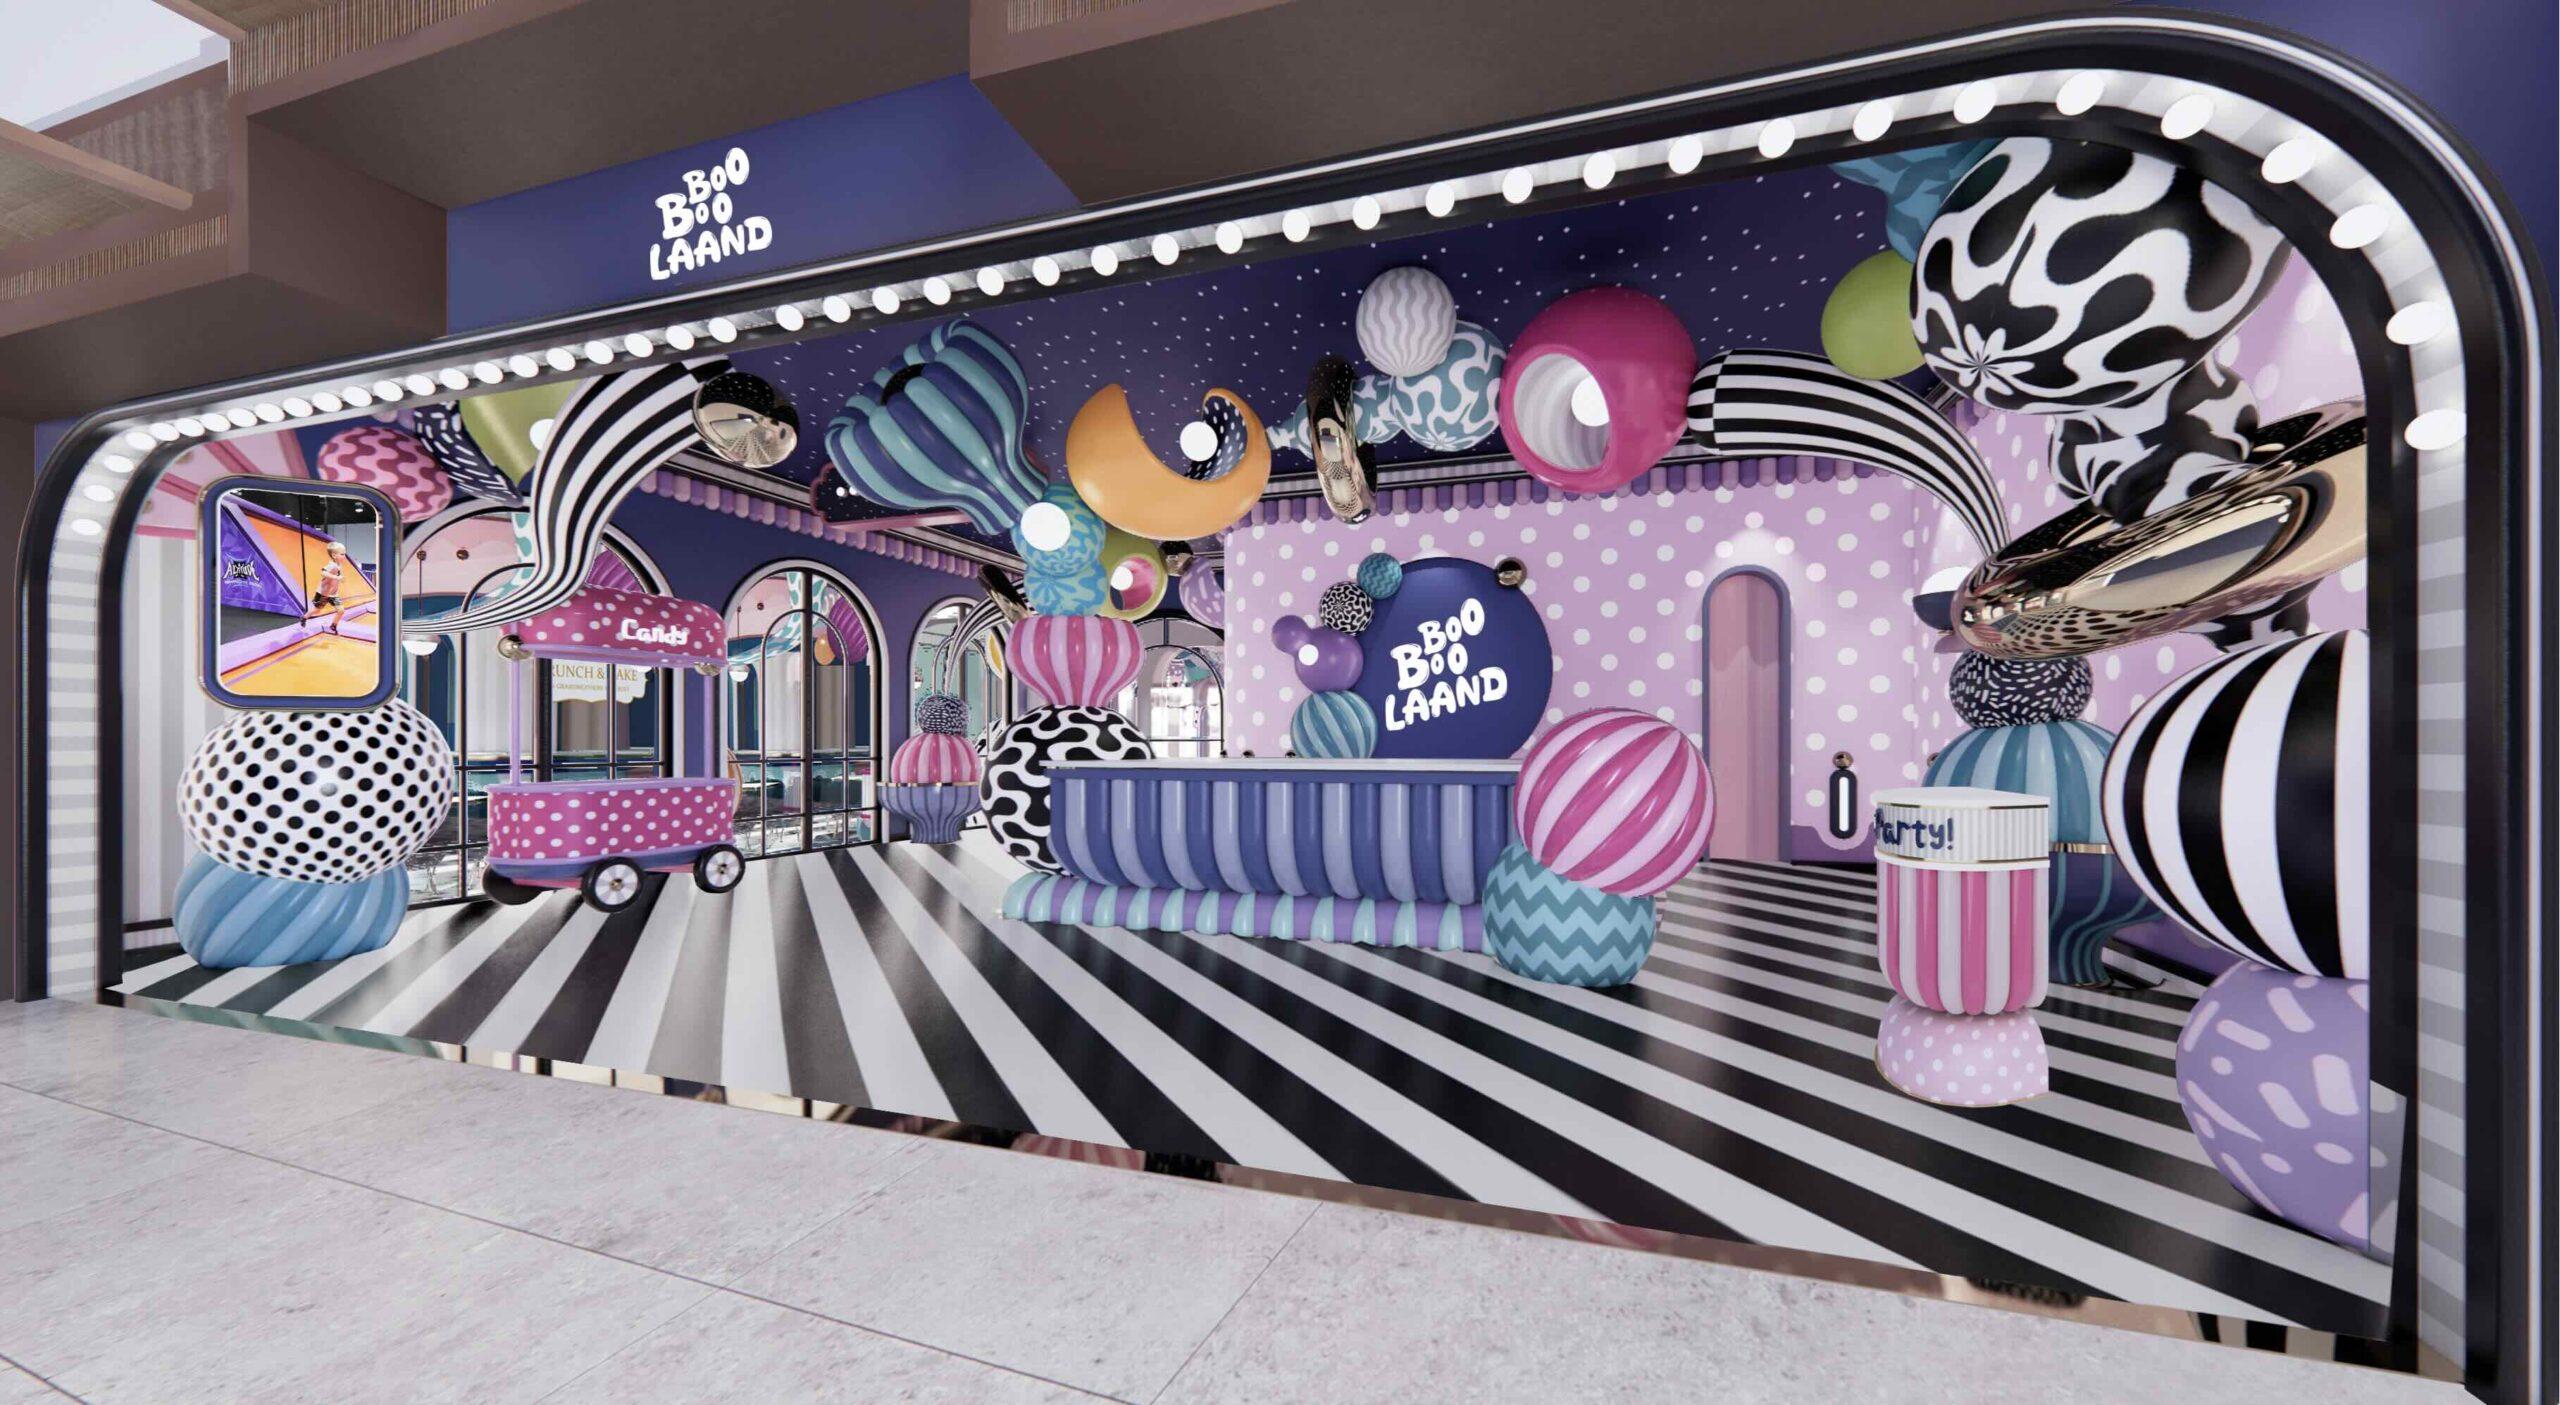 Boo Boo Laand brings a snow park and indoor playground to Dubai